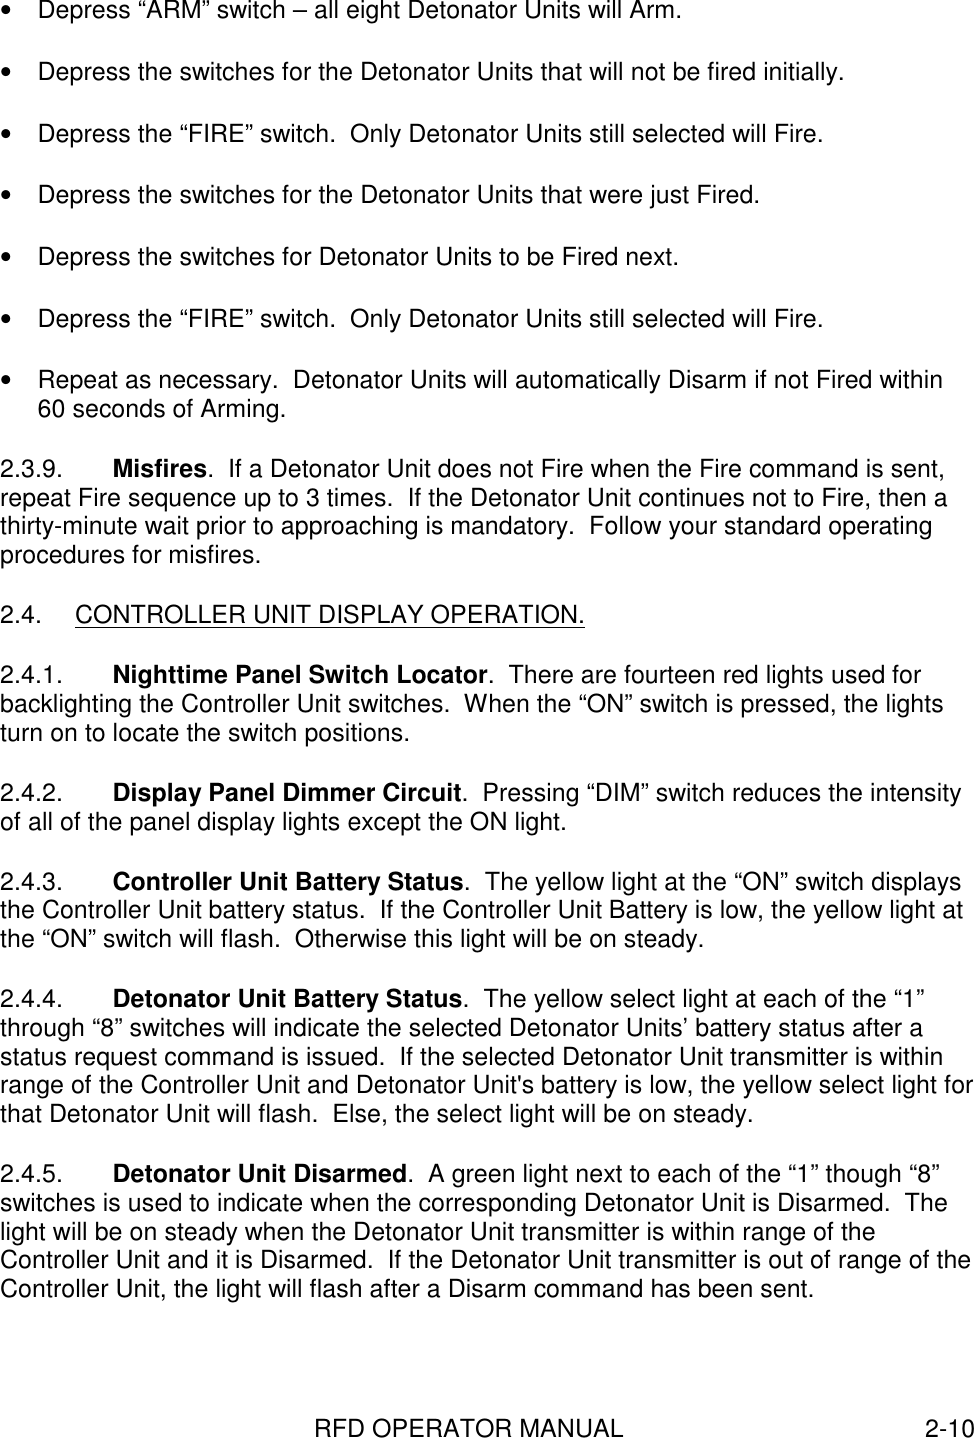 RFD OPERATOR MANUAL 2-10•  Depress “ARM” switch – all eight Detonator Units will Arm.•  Depress the switches for the Detonator Units that will not be fired initially.•  Depress the “FIRE” switch.  Only Detonator Units still selected will Fire.•  Depress the switches for the Detonator Units that were just Fired.•  Depress the switches for Detonator Units to be Fired next.•  Depress the “FIRE” switch.  Only Detonator Units still selected will Fire.•  Repeat as necessary.  Detonator Units will automatically Disarm if not Fired within60 seconds of Arming.2.3.9.  Misfires.  If a Detonator Unit does not Fire when the Fire command is sent,repeat Fire sequence up to 3 times.  If the Detonator Unit continues not to Fire, then athirty-minute wait prior to approaching is mandatory.  Follow your standard operatingprocedures for misfires.2.4.  CONTROLLER UNIT DISPLAY OPERATION.2.4.1.  Nighttime Panel Switch Locator.  There are fourteen red lights used forbacklighting the Controller Unit switches.  When the “ON” switch is pressed, the lightsturn on to locate the switch positions.2.4.2.  Display Panel Dimmer Circuit.  Pressing “DIM” switch reduces the intensityof all of the panel display lights except the ON light.2.4.3.  Controller Unit Battery Status.  The yellow light at the “ON” switch displaysthe Controller Unit battery status.  If the Controller Unit Battery is low, the yellow light atthe “ON” switch will flash.  Otherwise this light will be on steady.2.4.4.  Detonator Unit Battery Status.  The yellow select light at each of the “1”through “8” switches will indicate the selected Detonator Units’ battery status after astatus request command is issued.  If the selected Detonator Unit transmitter is withinrange of the Controller Unit and Detonator Unit&apos;s battery is low, the yellow select light forthat Detonator Unit will flash.  Else, the select light will be on steady.2.4.5.  Detonator Unit Disarmed.  A green light next to each of the “1” though “8”switches is used to indicate when the corresponding Detonator Unit is Disarmed.  Thelight will be on steady when the Detonator Unit transmitter is within range of theController Unit and it is Disarmed.  If the Detonator Unit transmitter is out of range of theController Unit, the light will flash after a Disarm command has been sent.